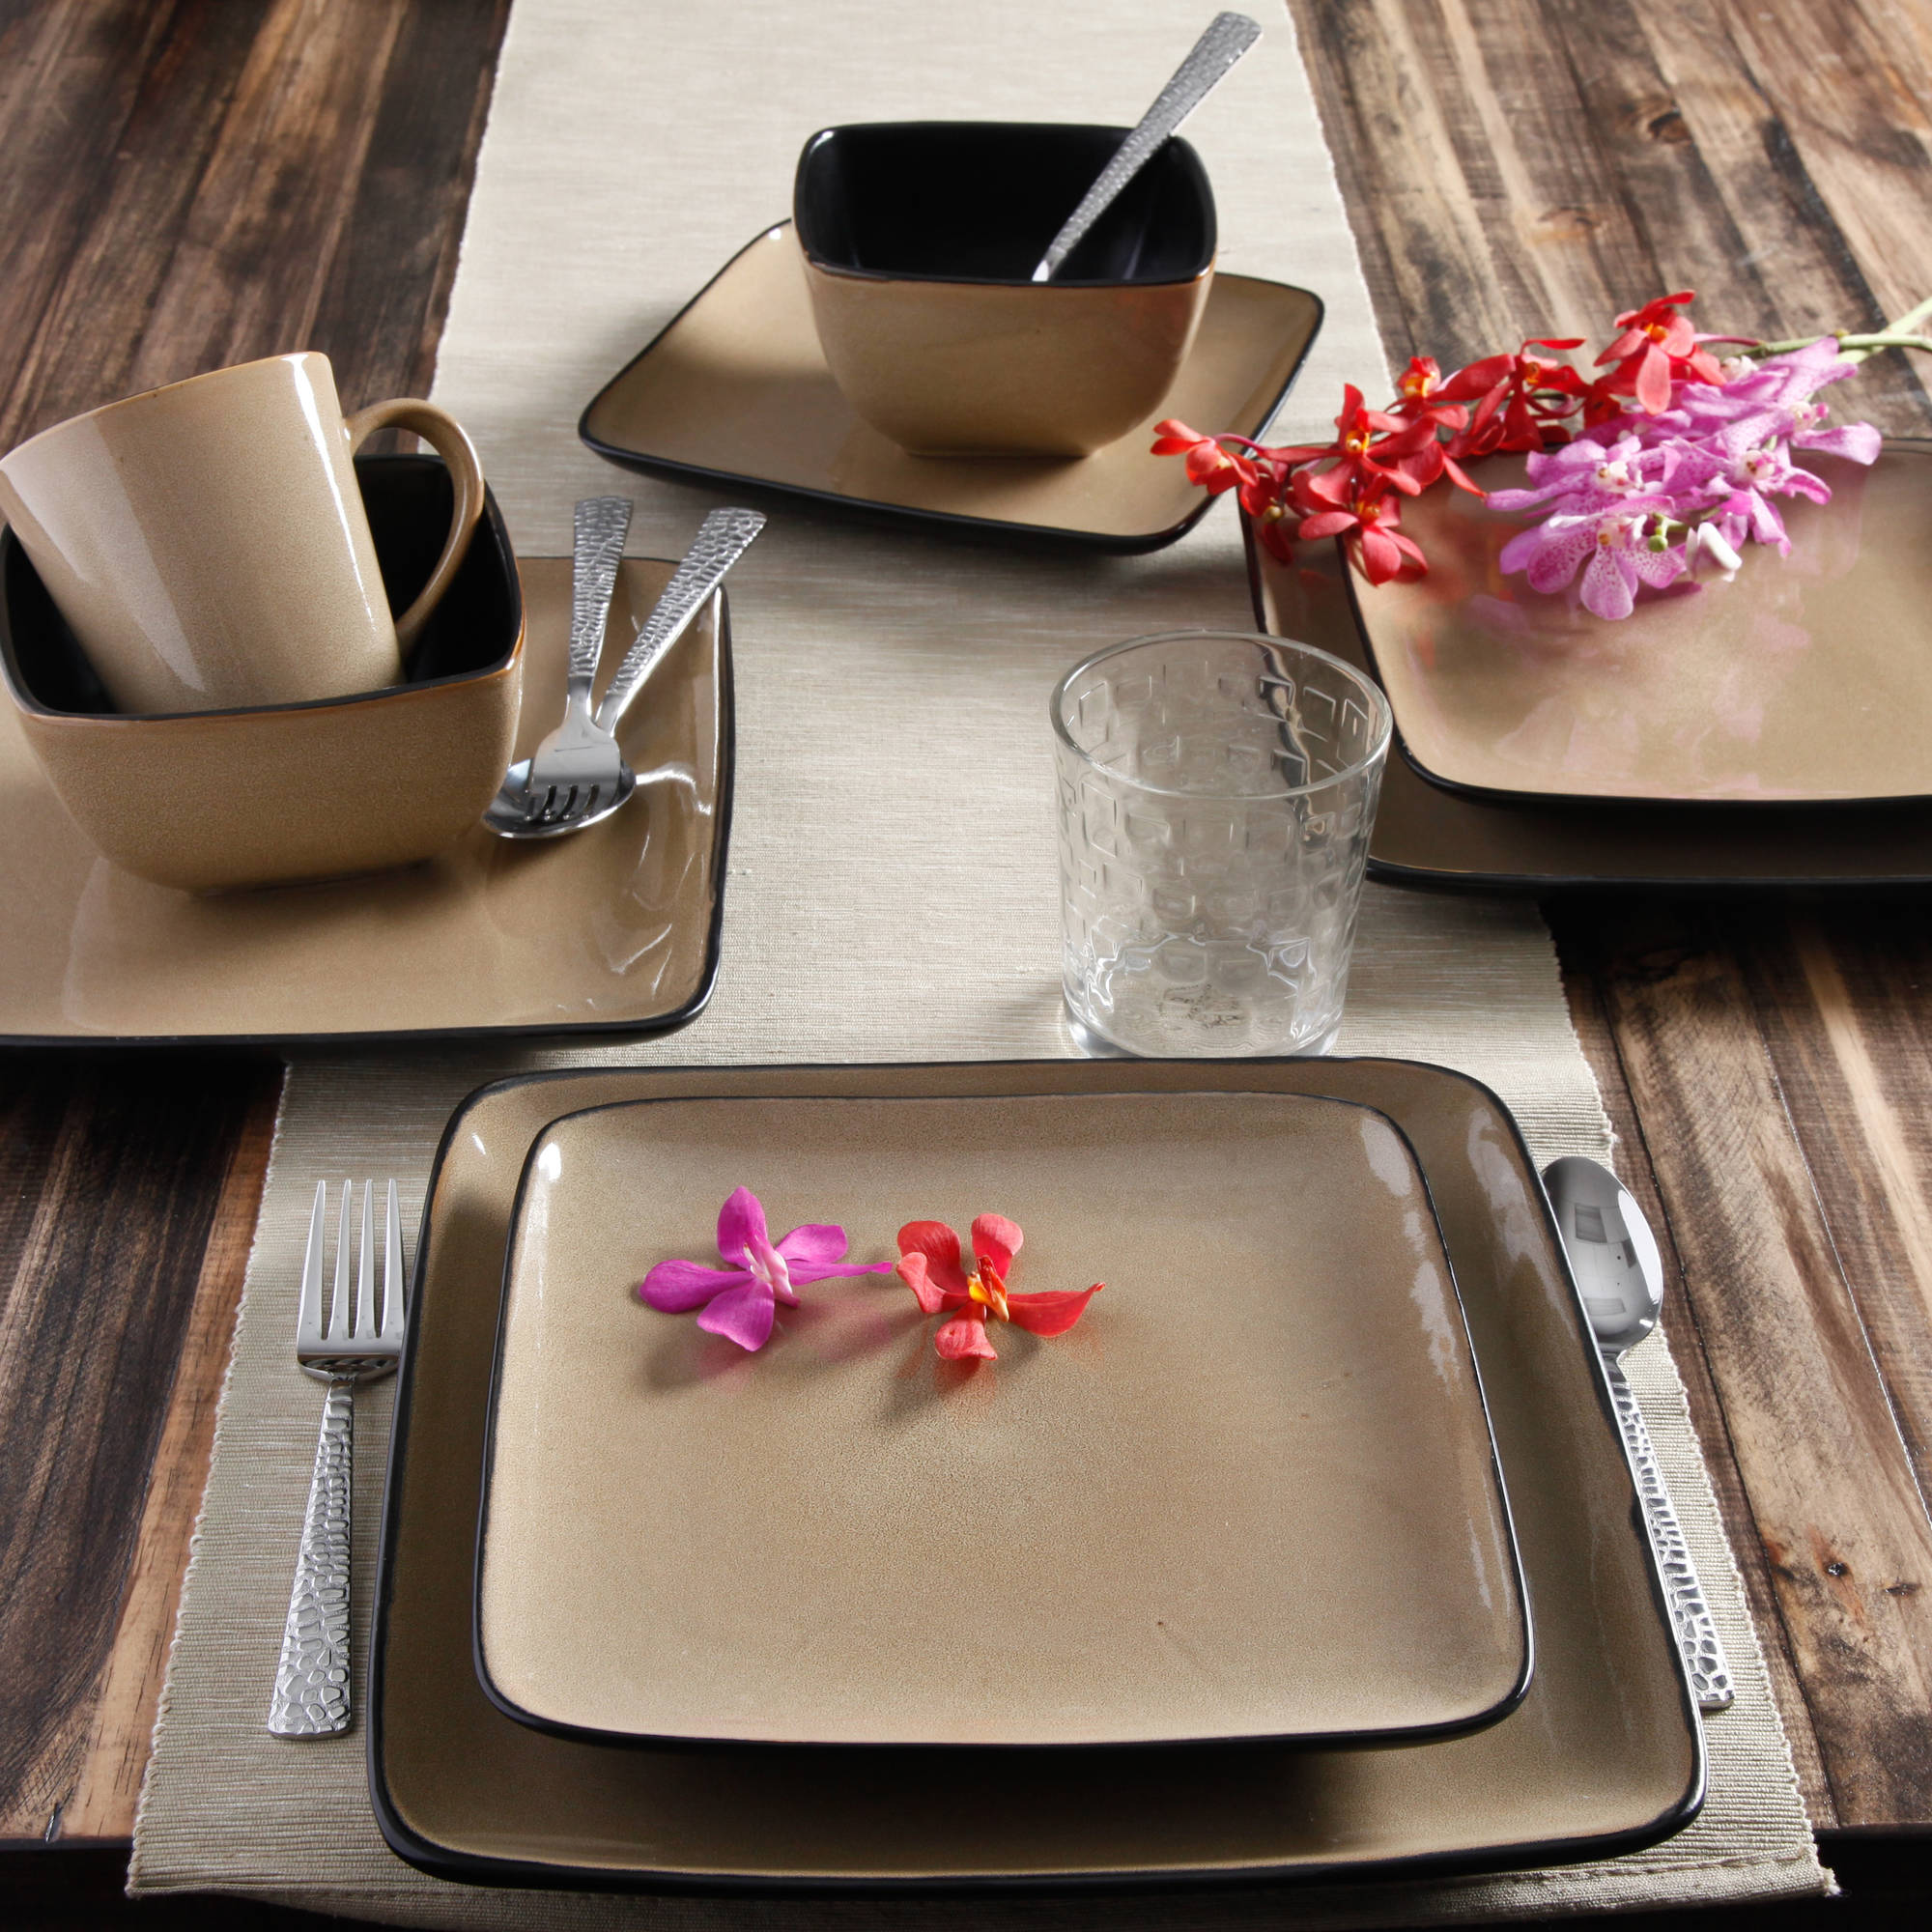 Gibson Home Rave Square 16-Piece Dinnerware Set, Taupe - image 2 of 8